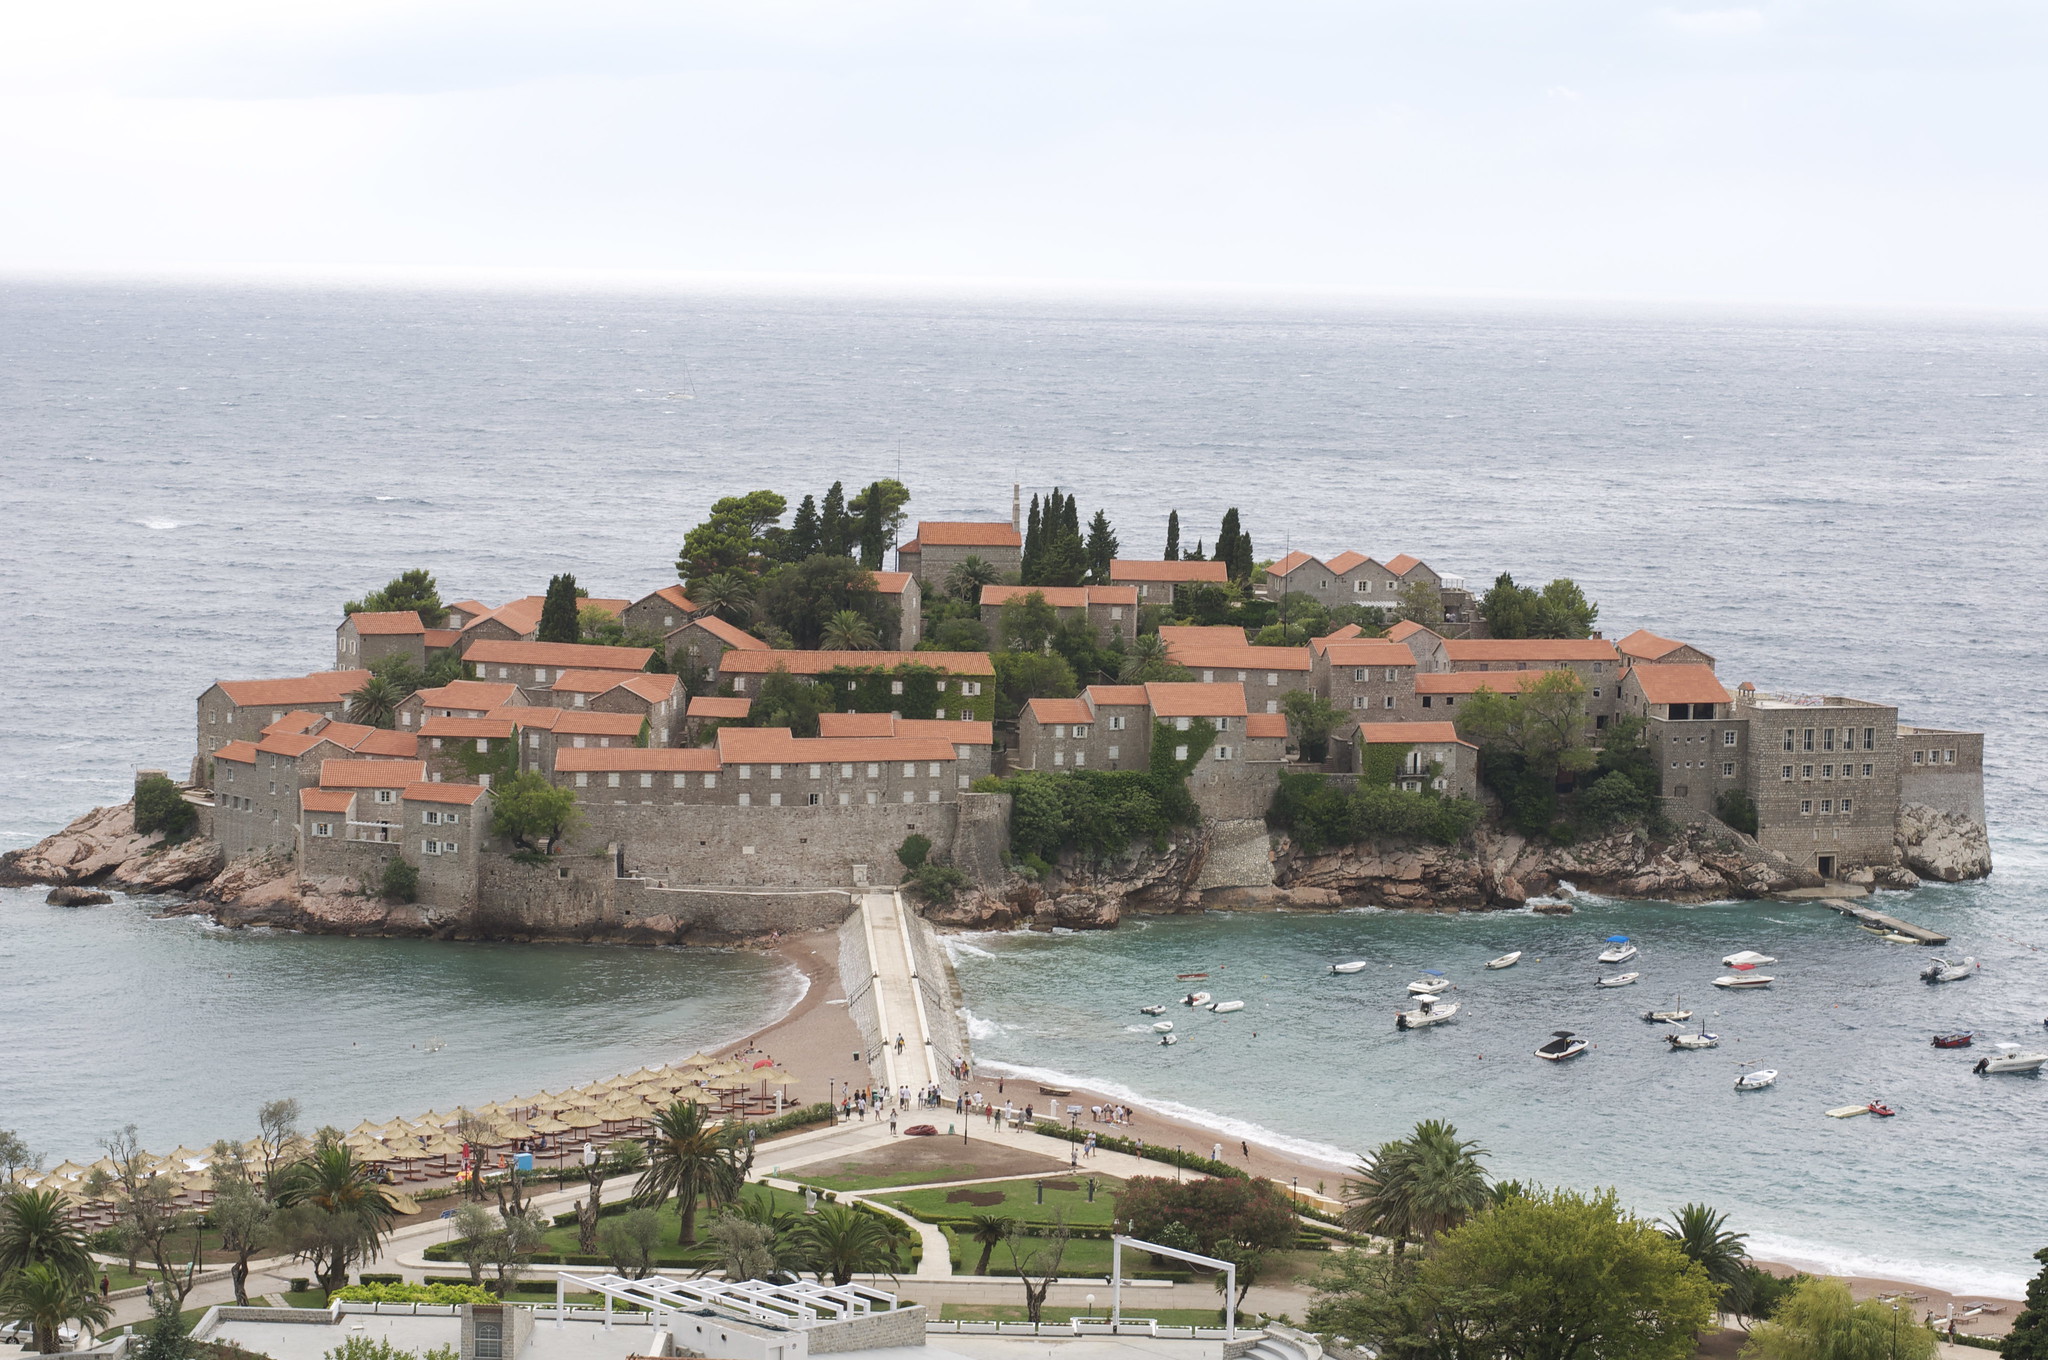 10 Day Montenegro Itinerary How to Enjoy Montenegro in 10 Days!